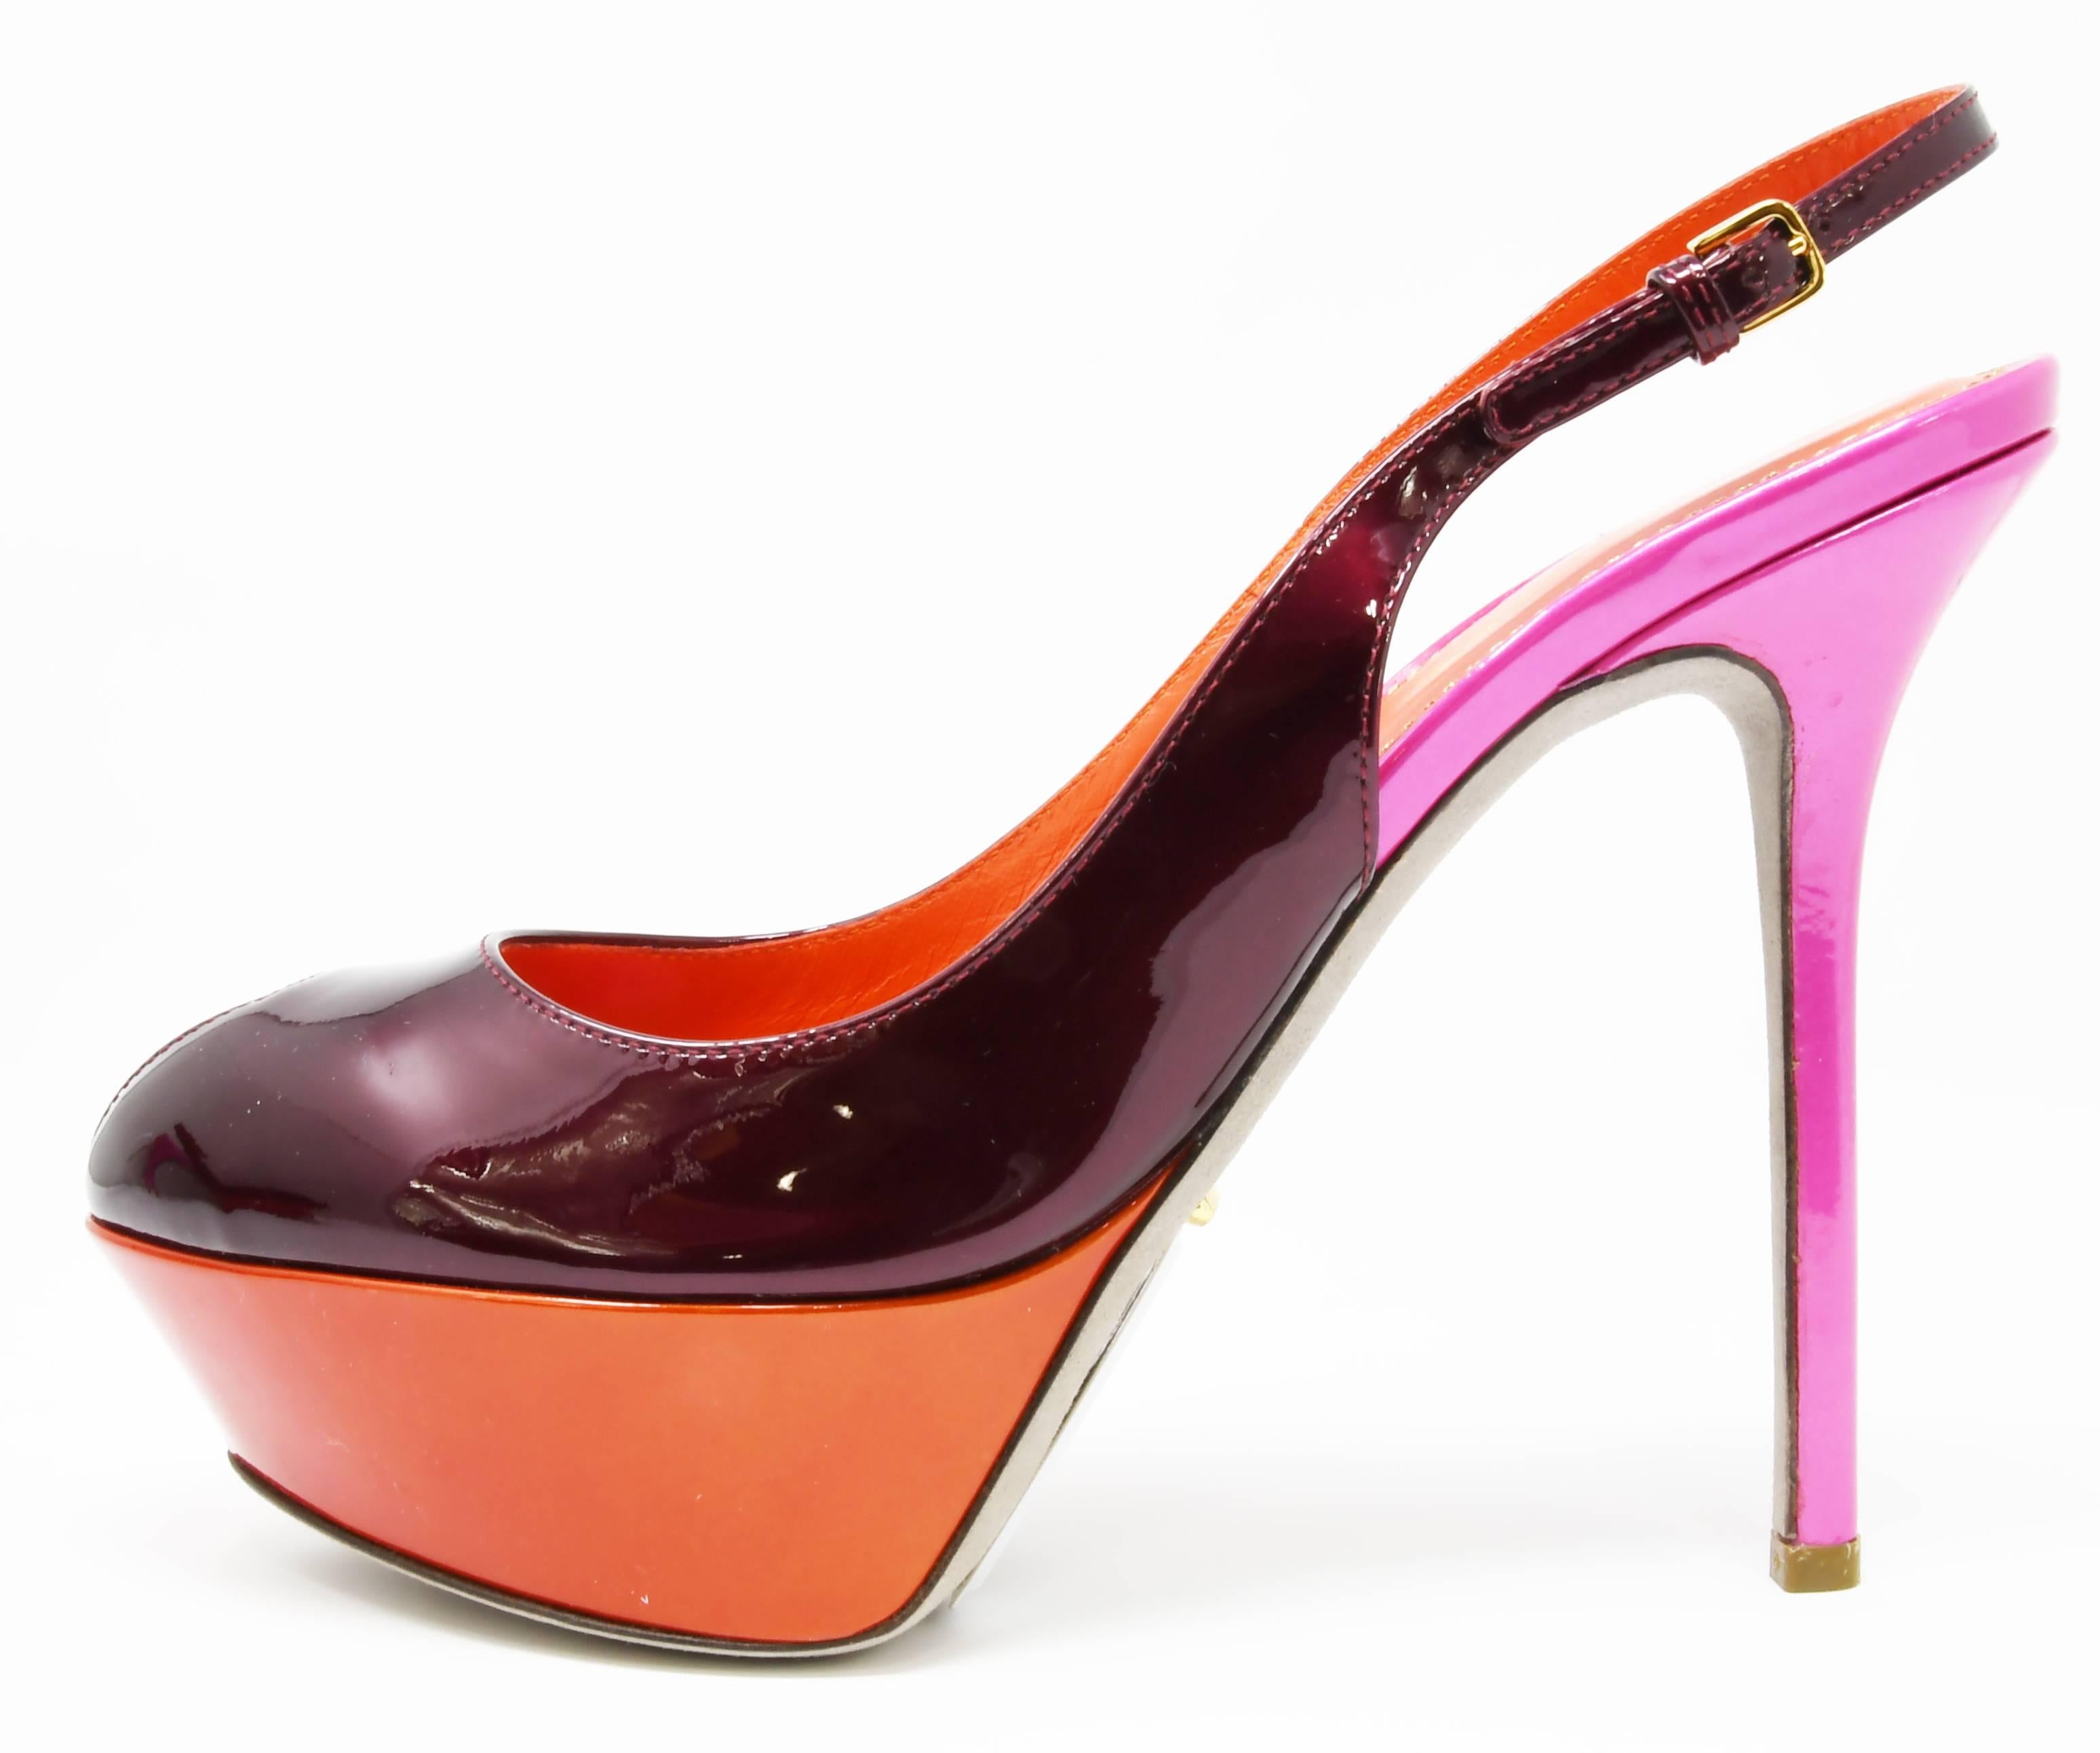 A gorgeous Sergio Rossi statement piece in color block.  Multi colored orange, fuchsia and burgundy platform heels.  Sling back with stiletto heel.  Never been worn. Size 36